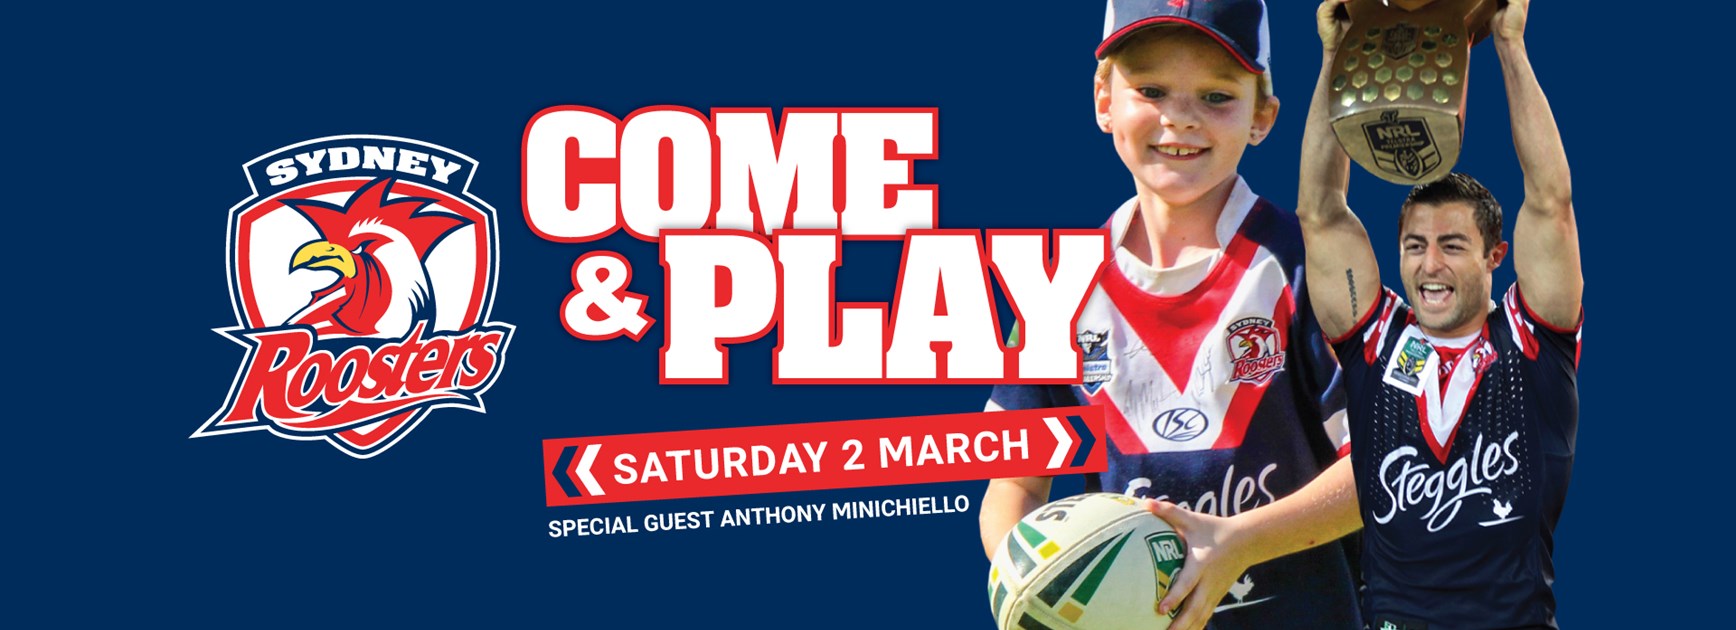 Come And Play | Central Coast